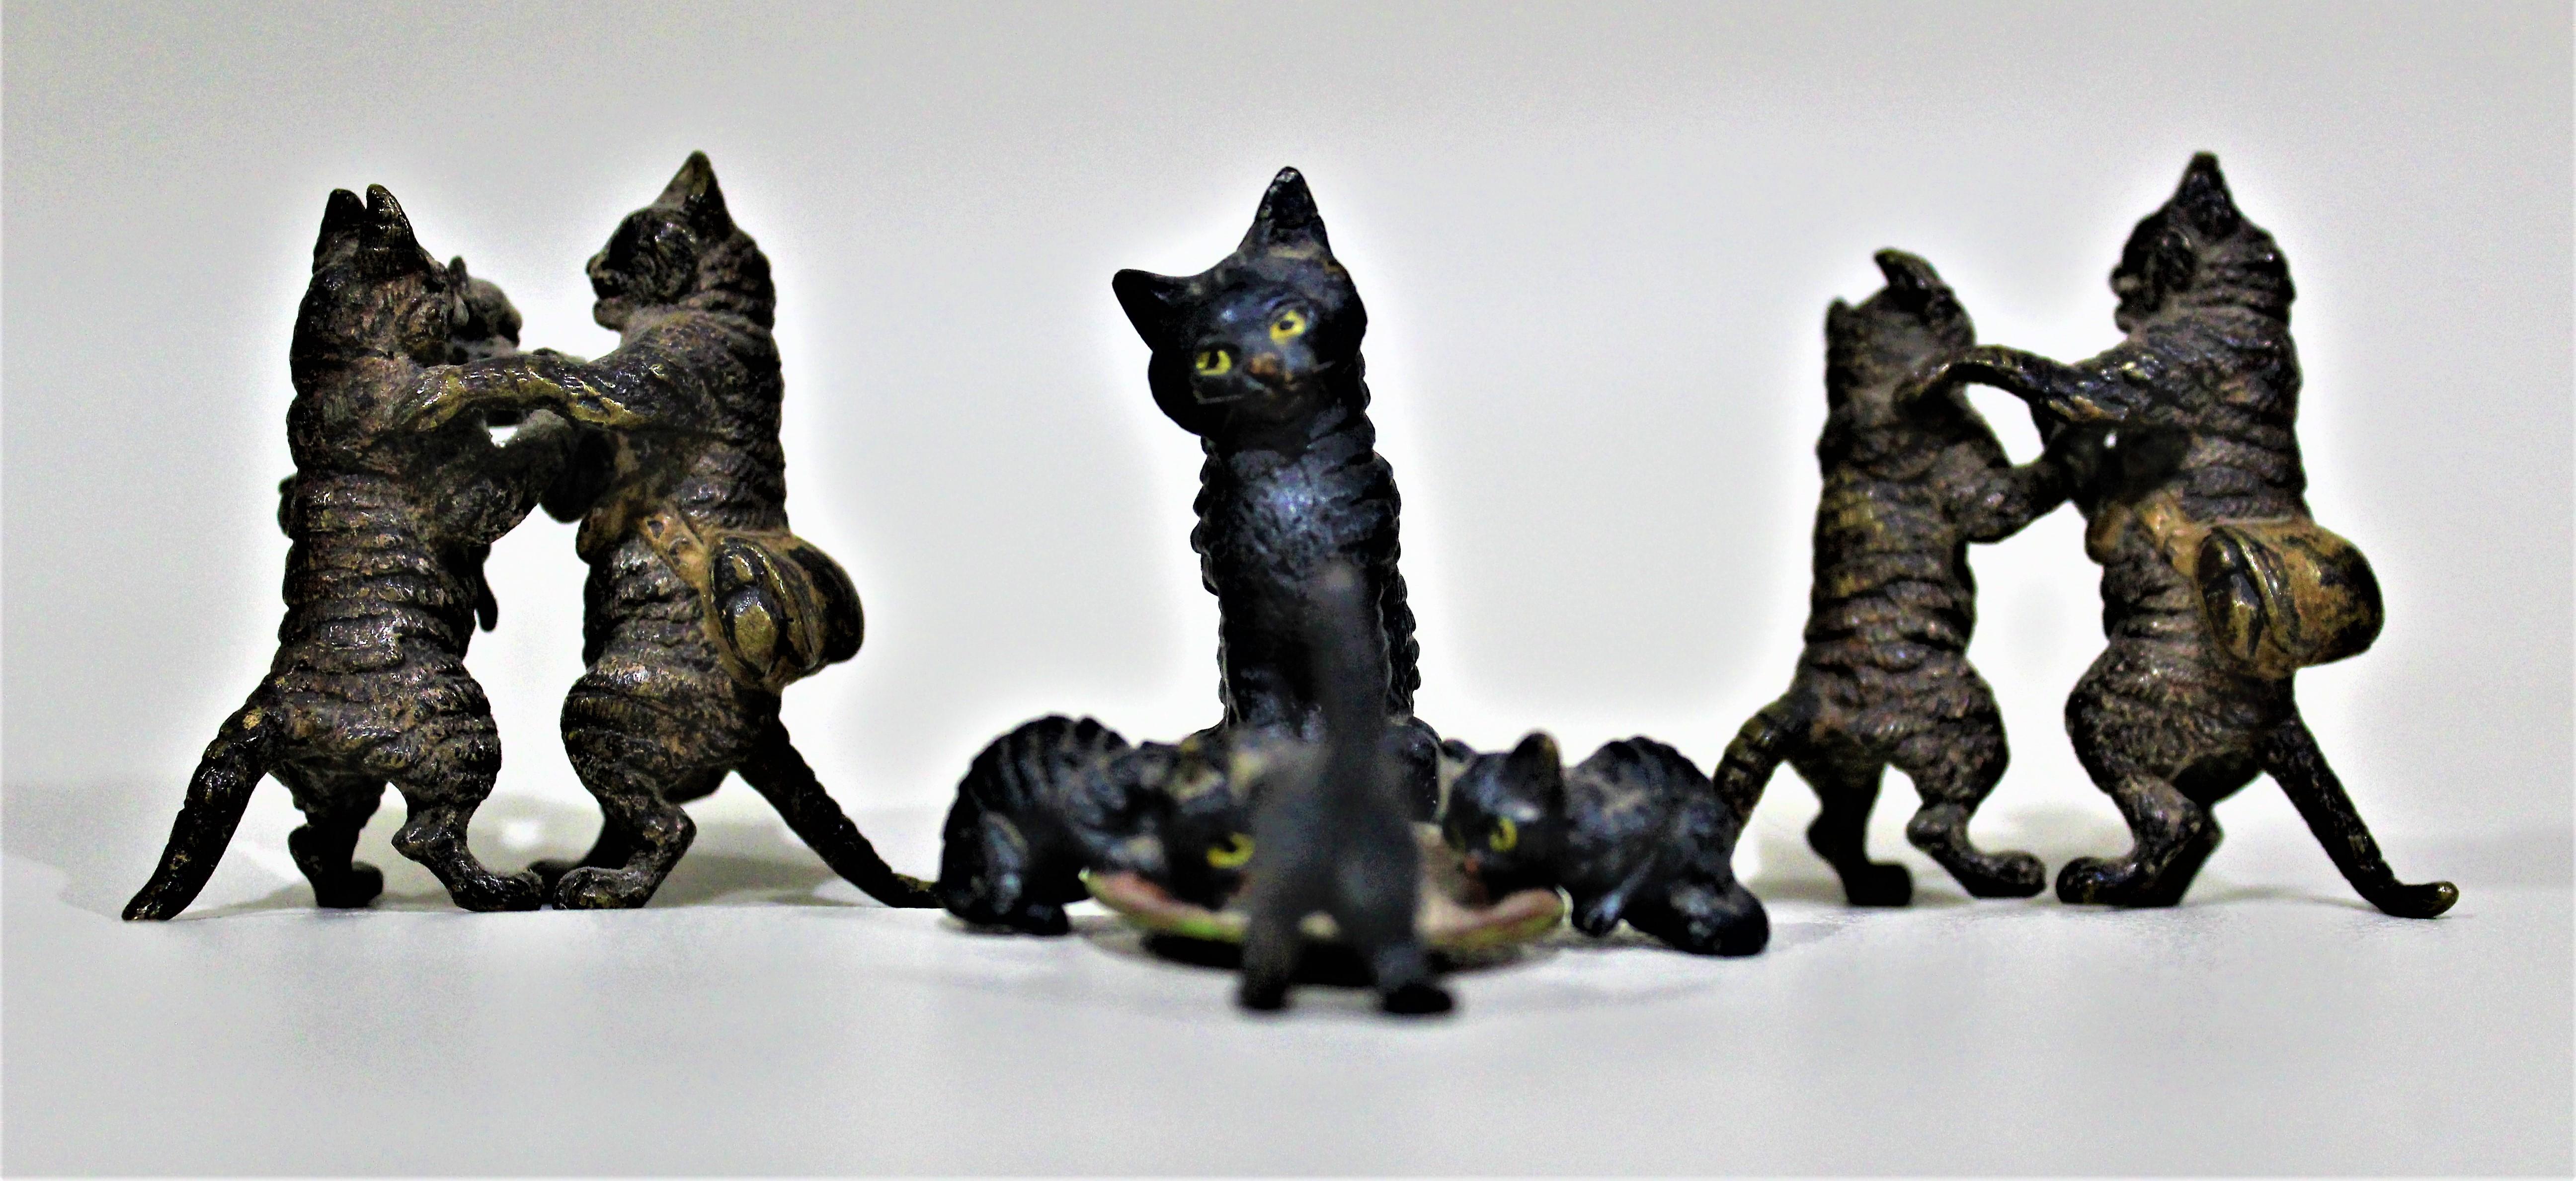 Lot of three ornately cast and cold-painted antique Austrian bronze miniatures of whimsical cats; two sculptures depicting dancing and the other portrays a mother with her kittens sharing a bowl of milk. These figurines are highly detailed cast and